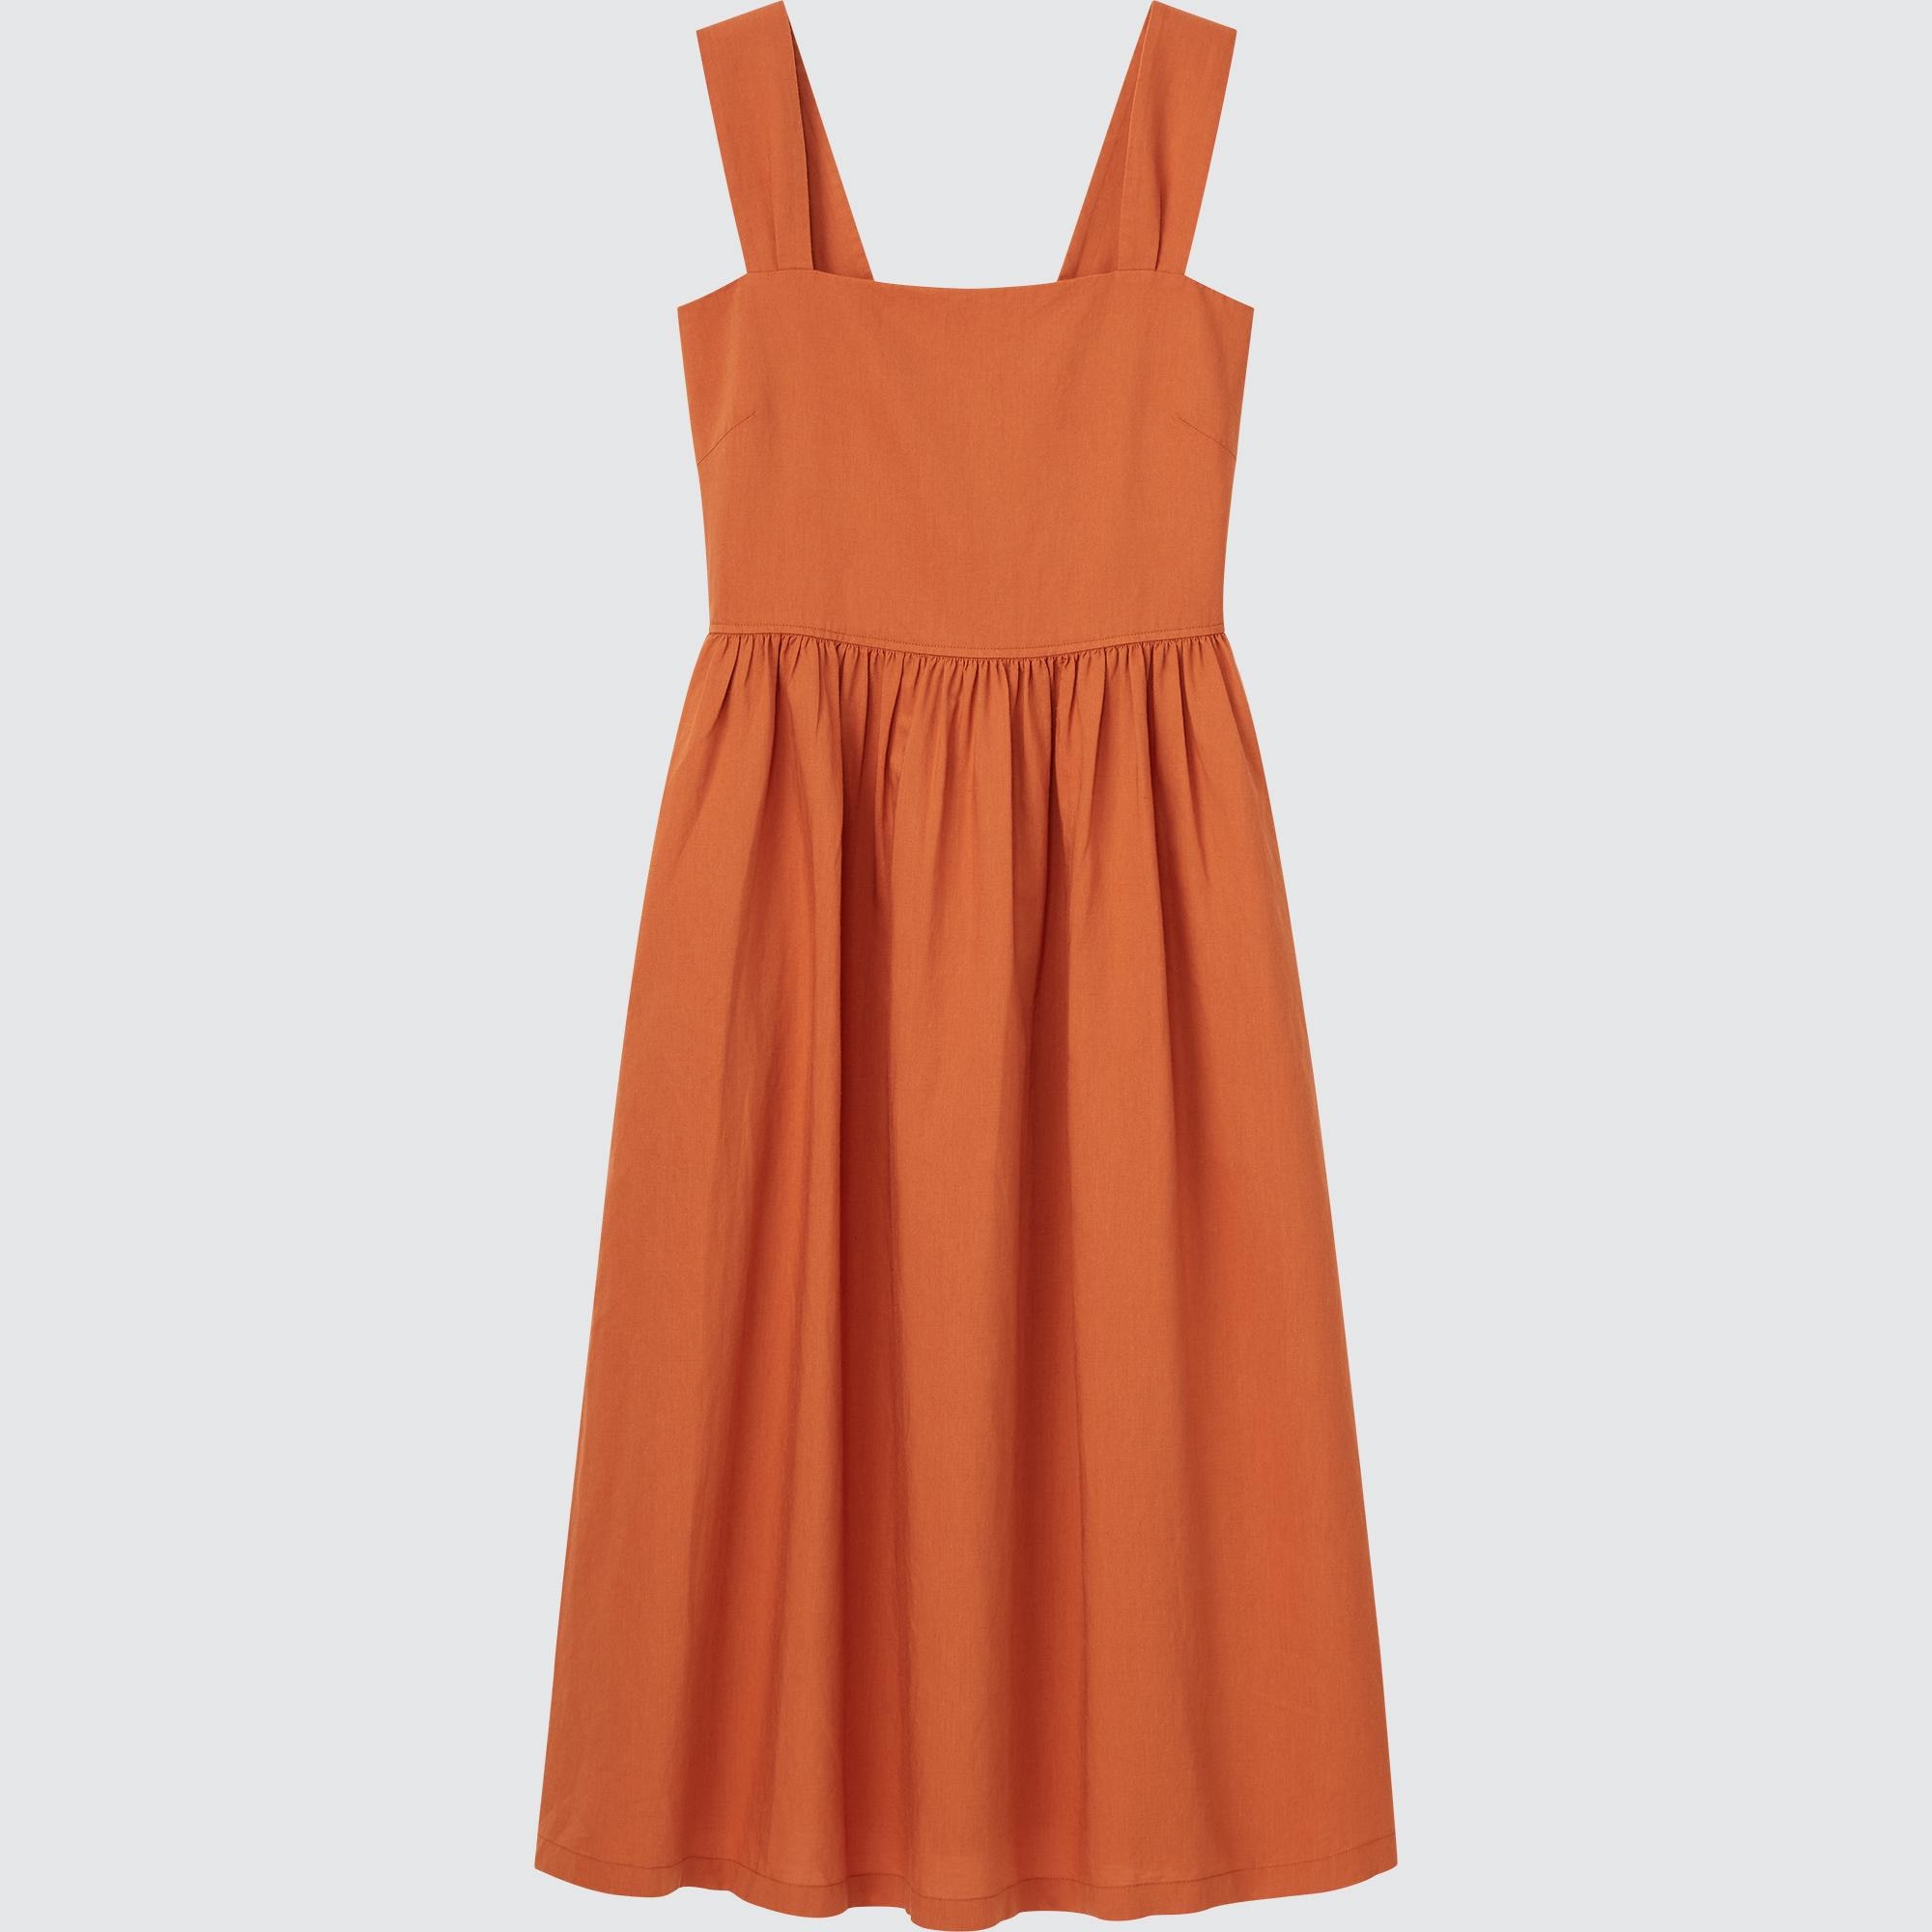 Check styling ideas for「Linen-Blend Shirred Sleeveless Dress」| UNIQLO US